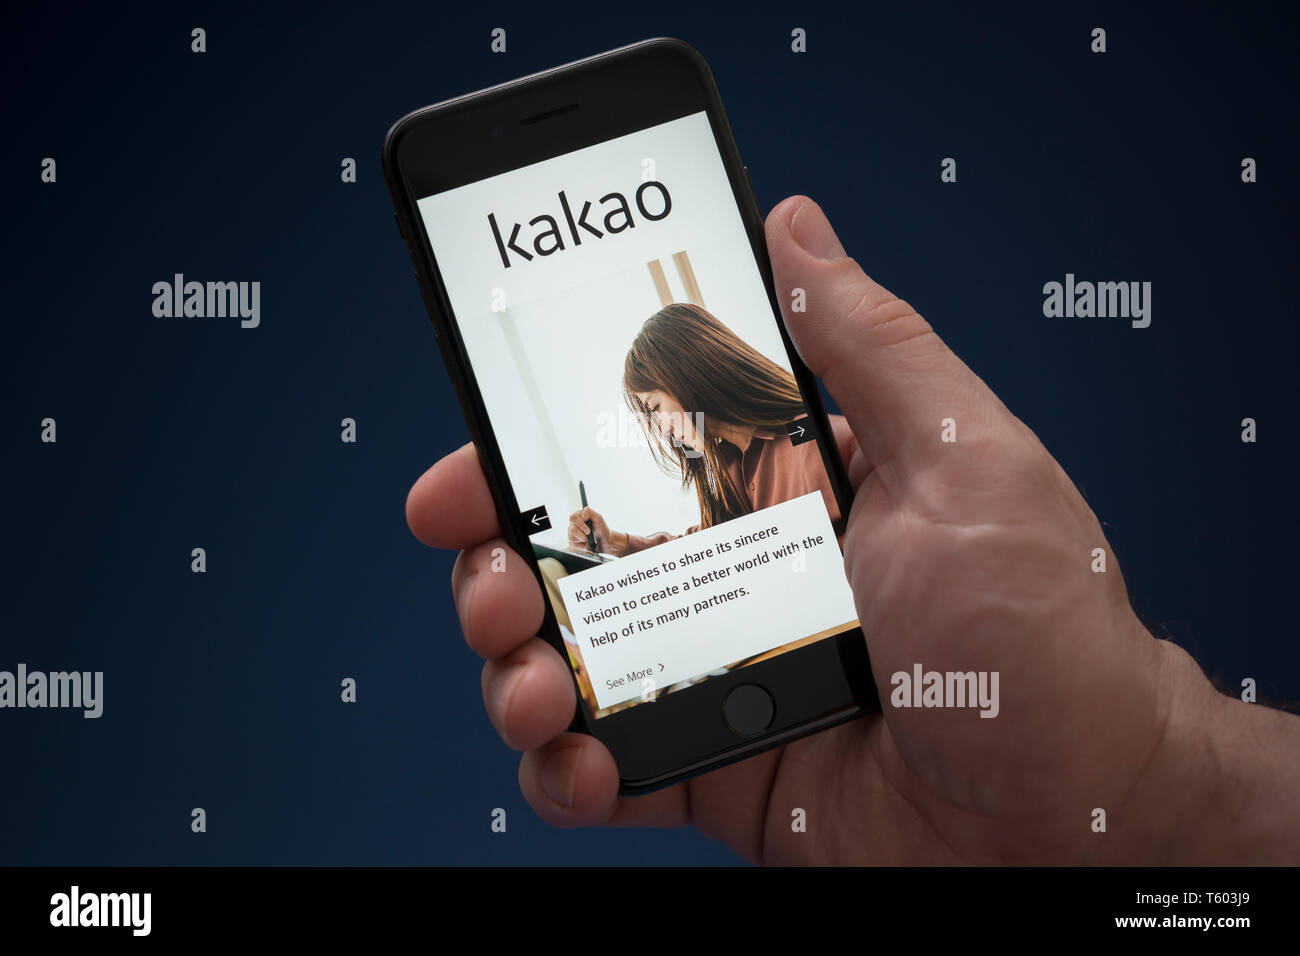 A man looks at his iPhone which displays the Kakao logo (Editorial use only). Stock Photo